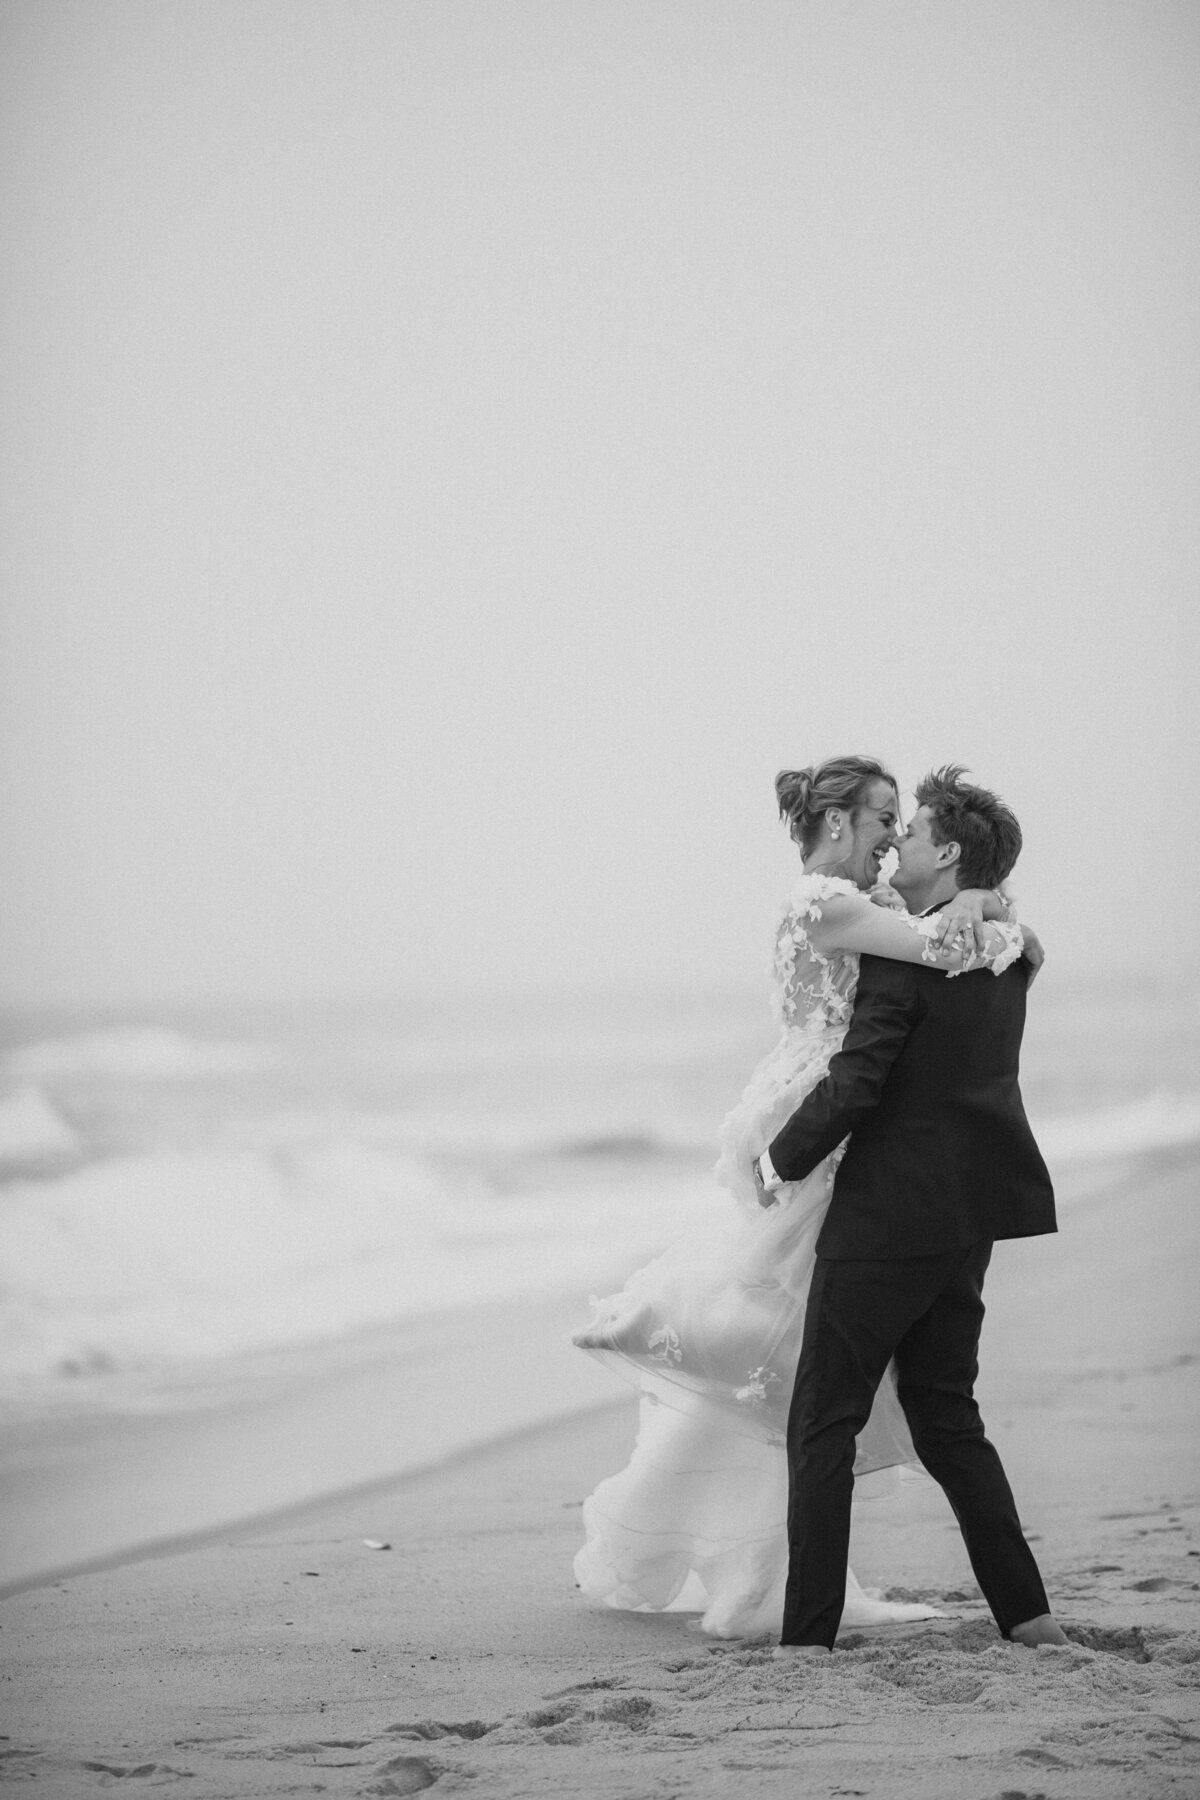 A bride and groom about to kiss on a beach.